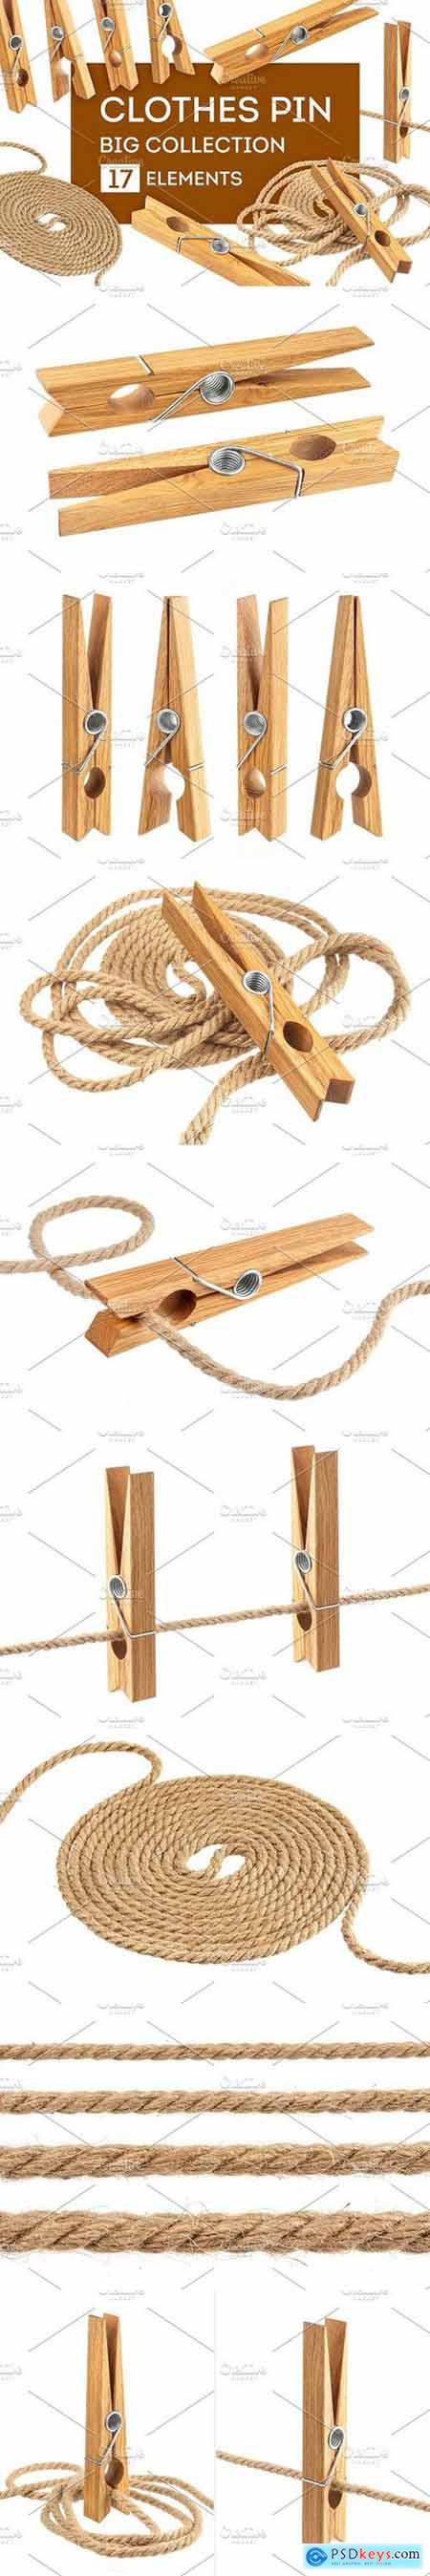 Clothes pin and rope